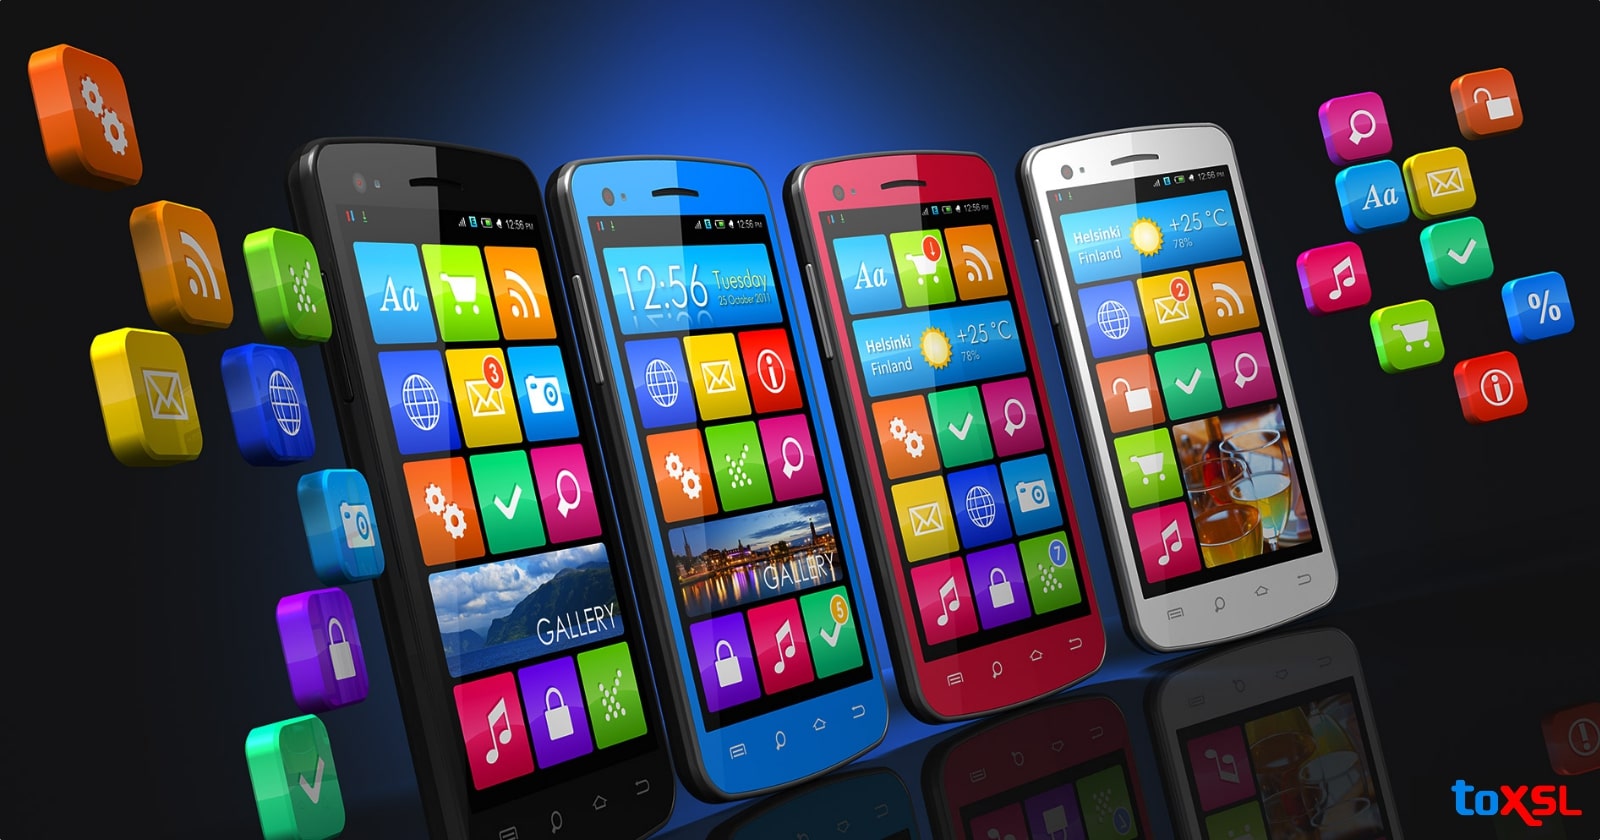 The Era of Smartphone & Mobile Applications